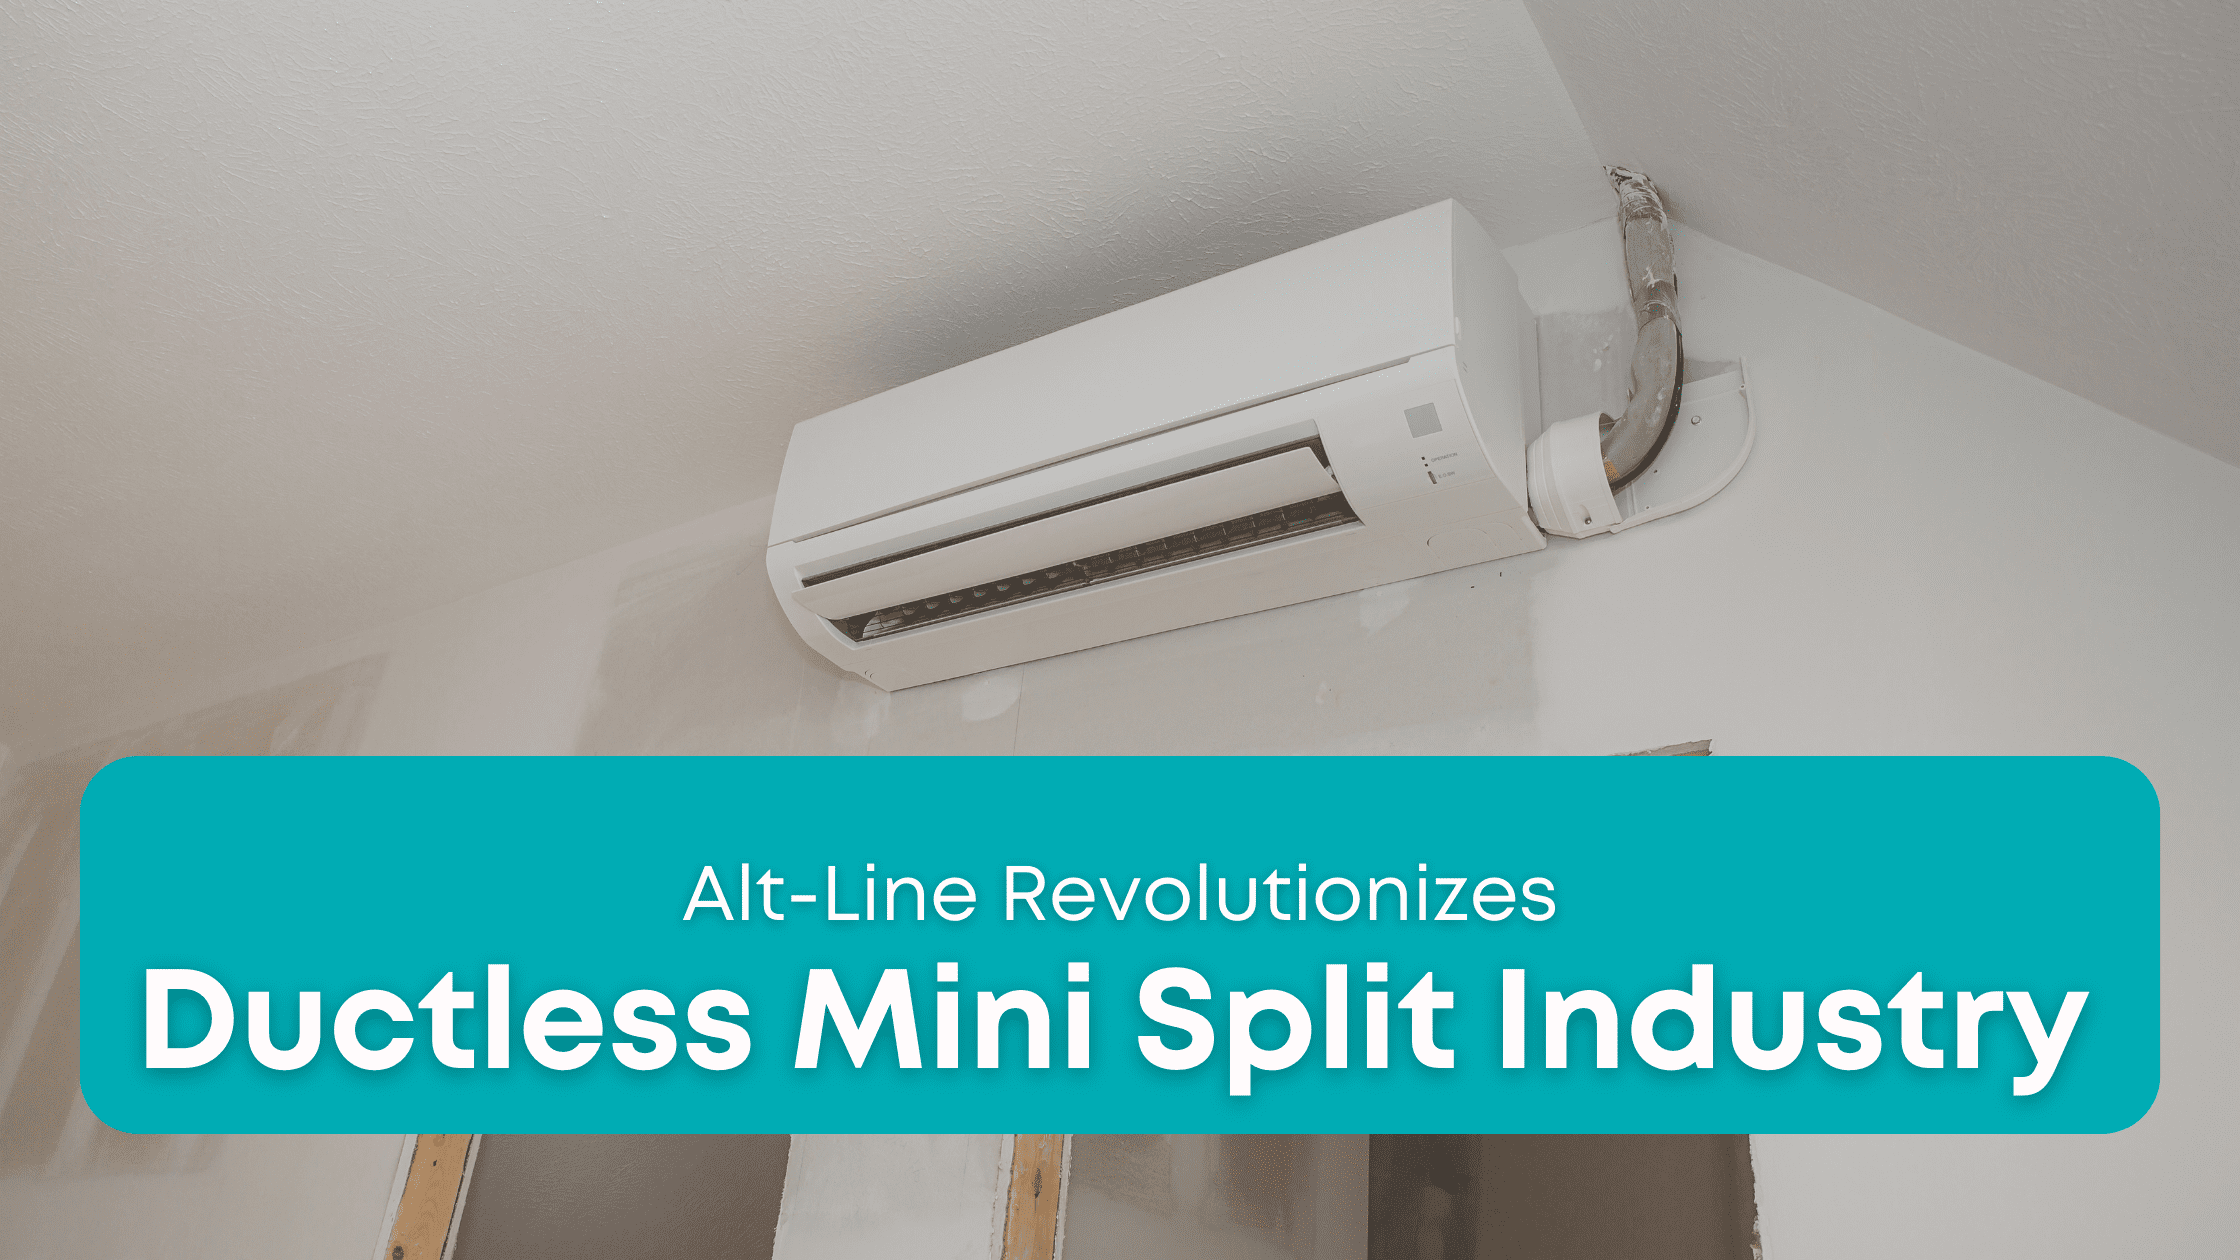 Leveraging the Advantages of Alt-Line in the Ductless Mini Split Industry